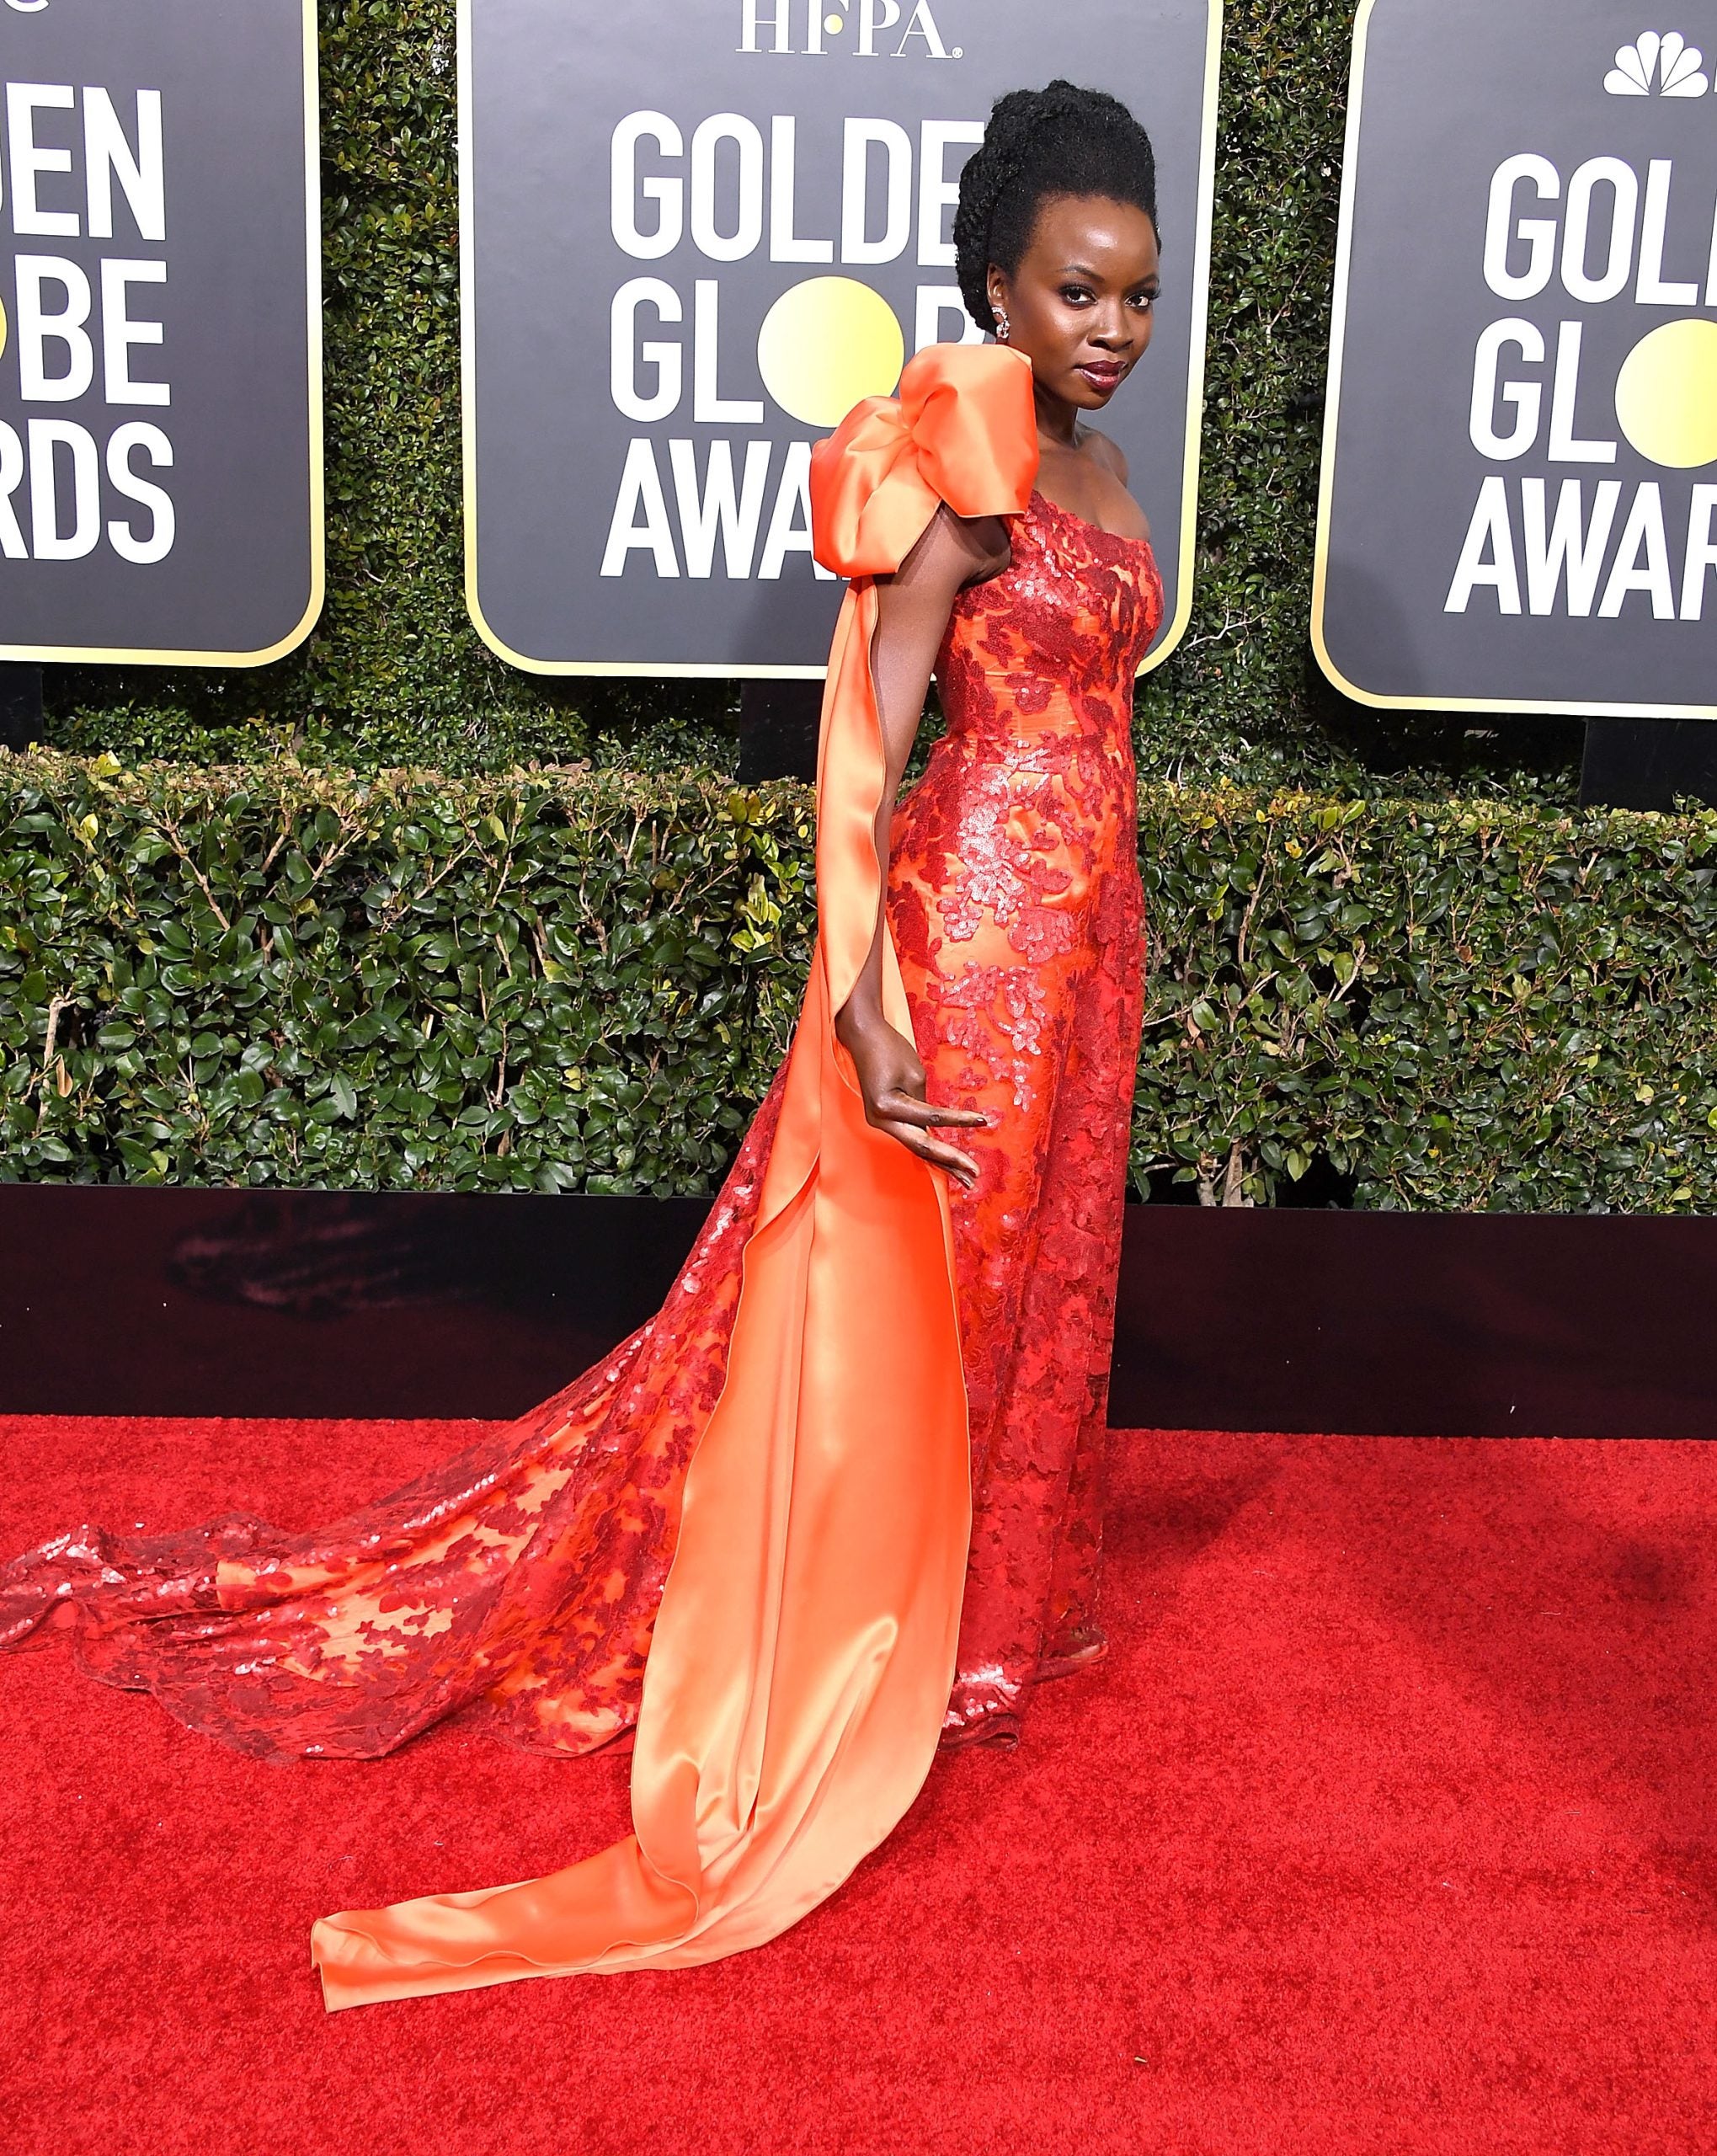 The Most Glamorous Golden Globe Red Carpet Looks Throughout The Years